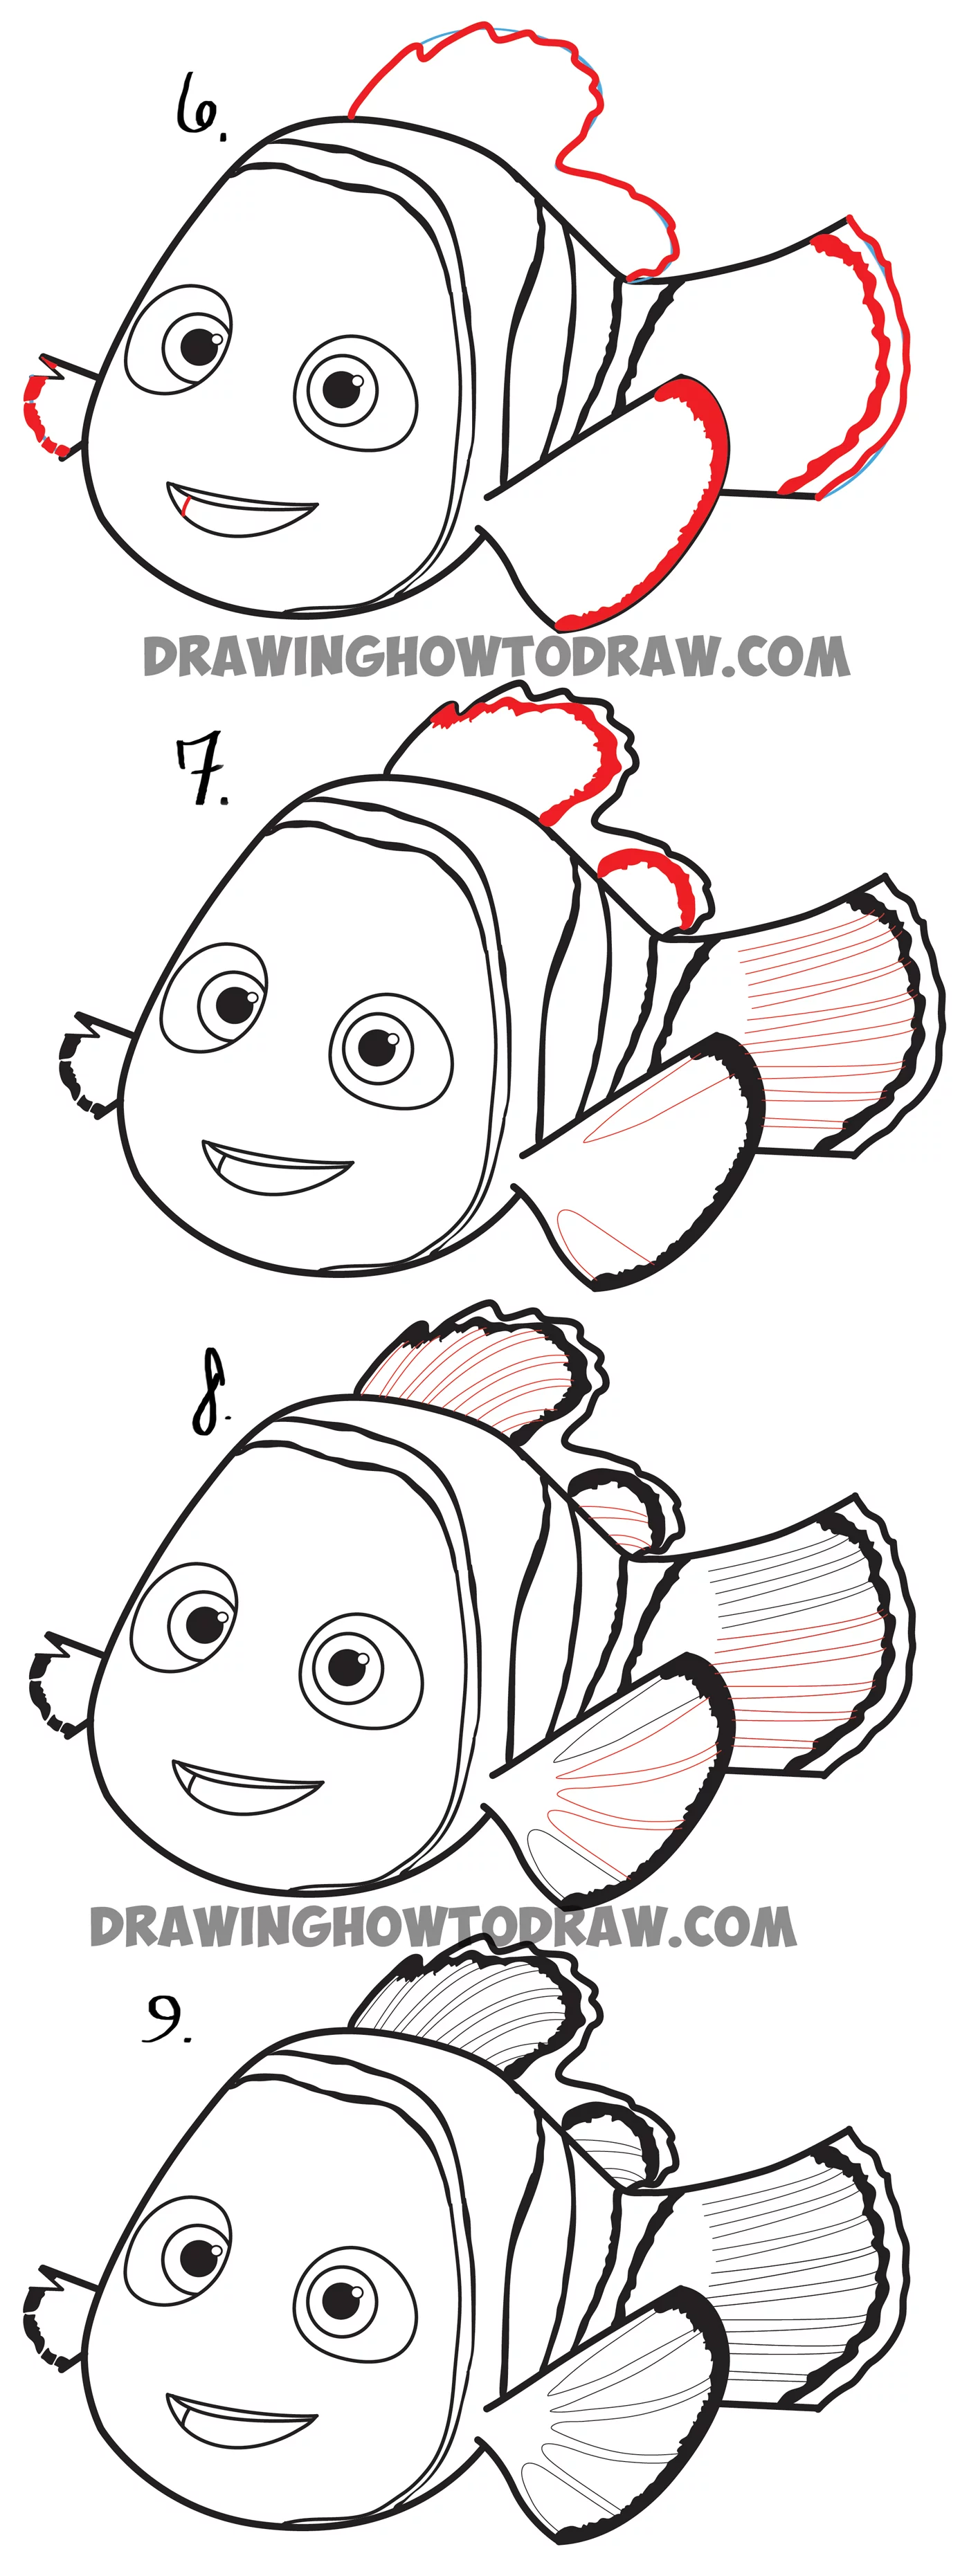 How To Draw Nemo From Disney S Finding Dory Step By Step Drawing Tutorial How To Draw Step By Step Drawing Tutorials